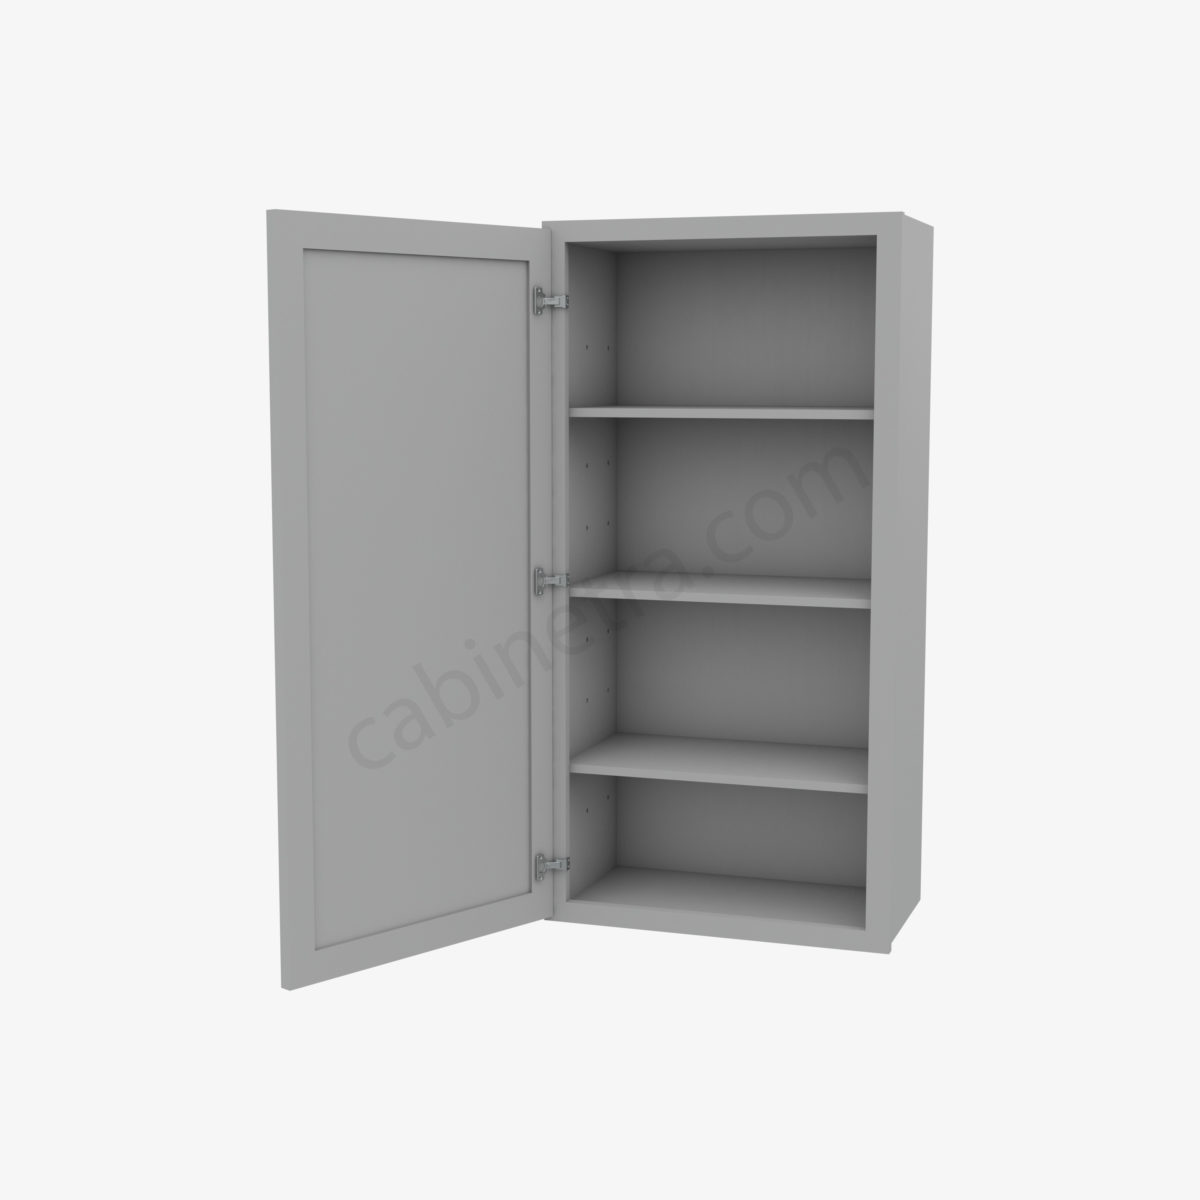 AB W2142 5 Forevermark Lait Gray Shaker Cabinetra scaled